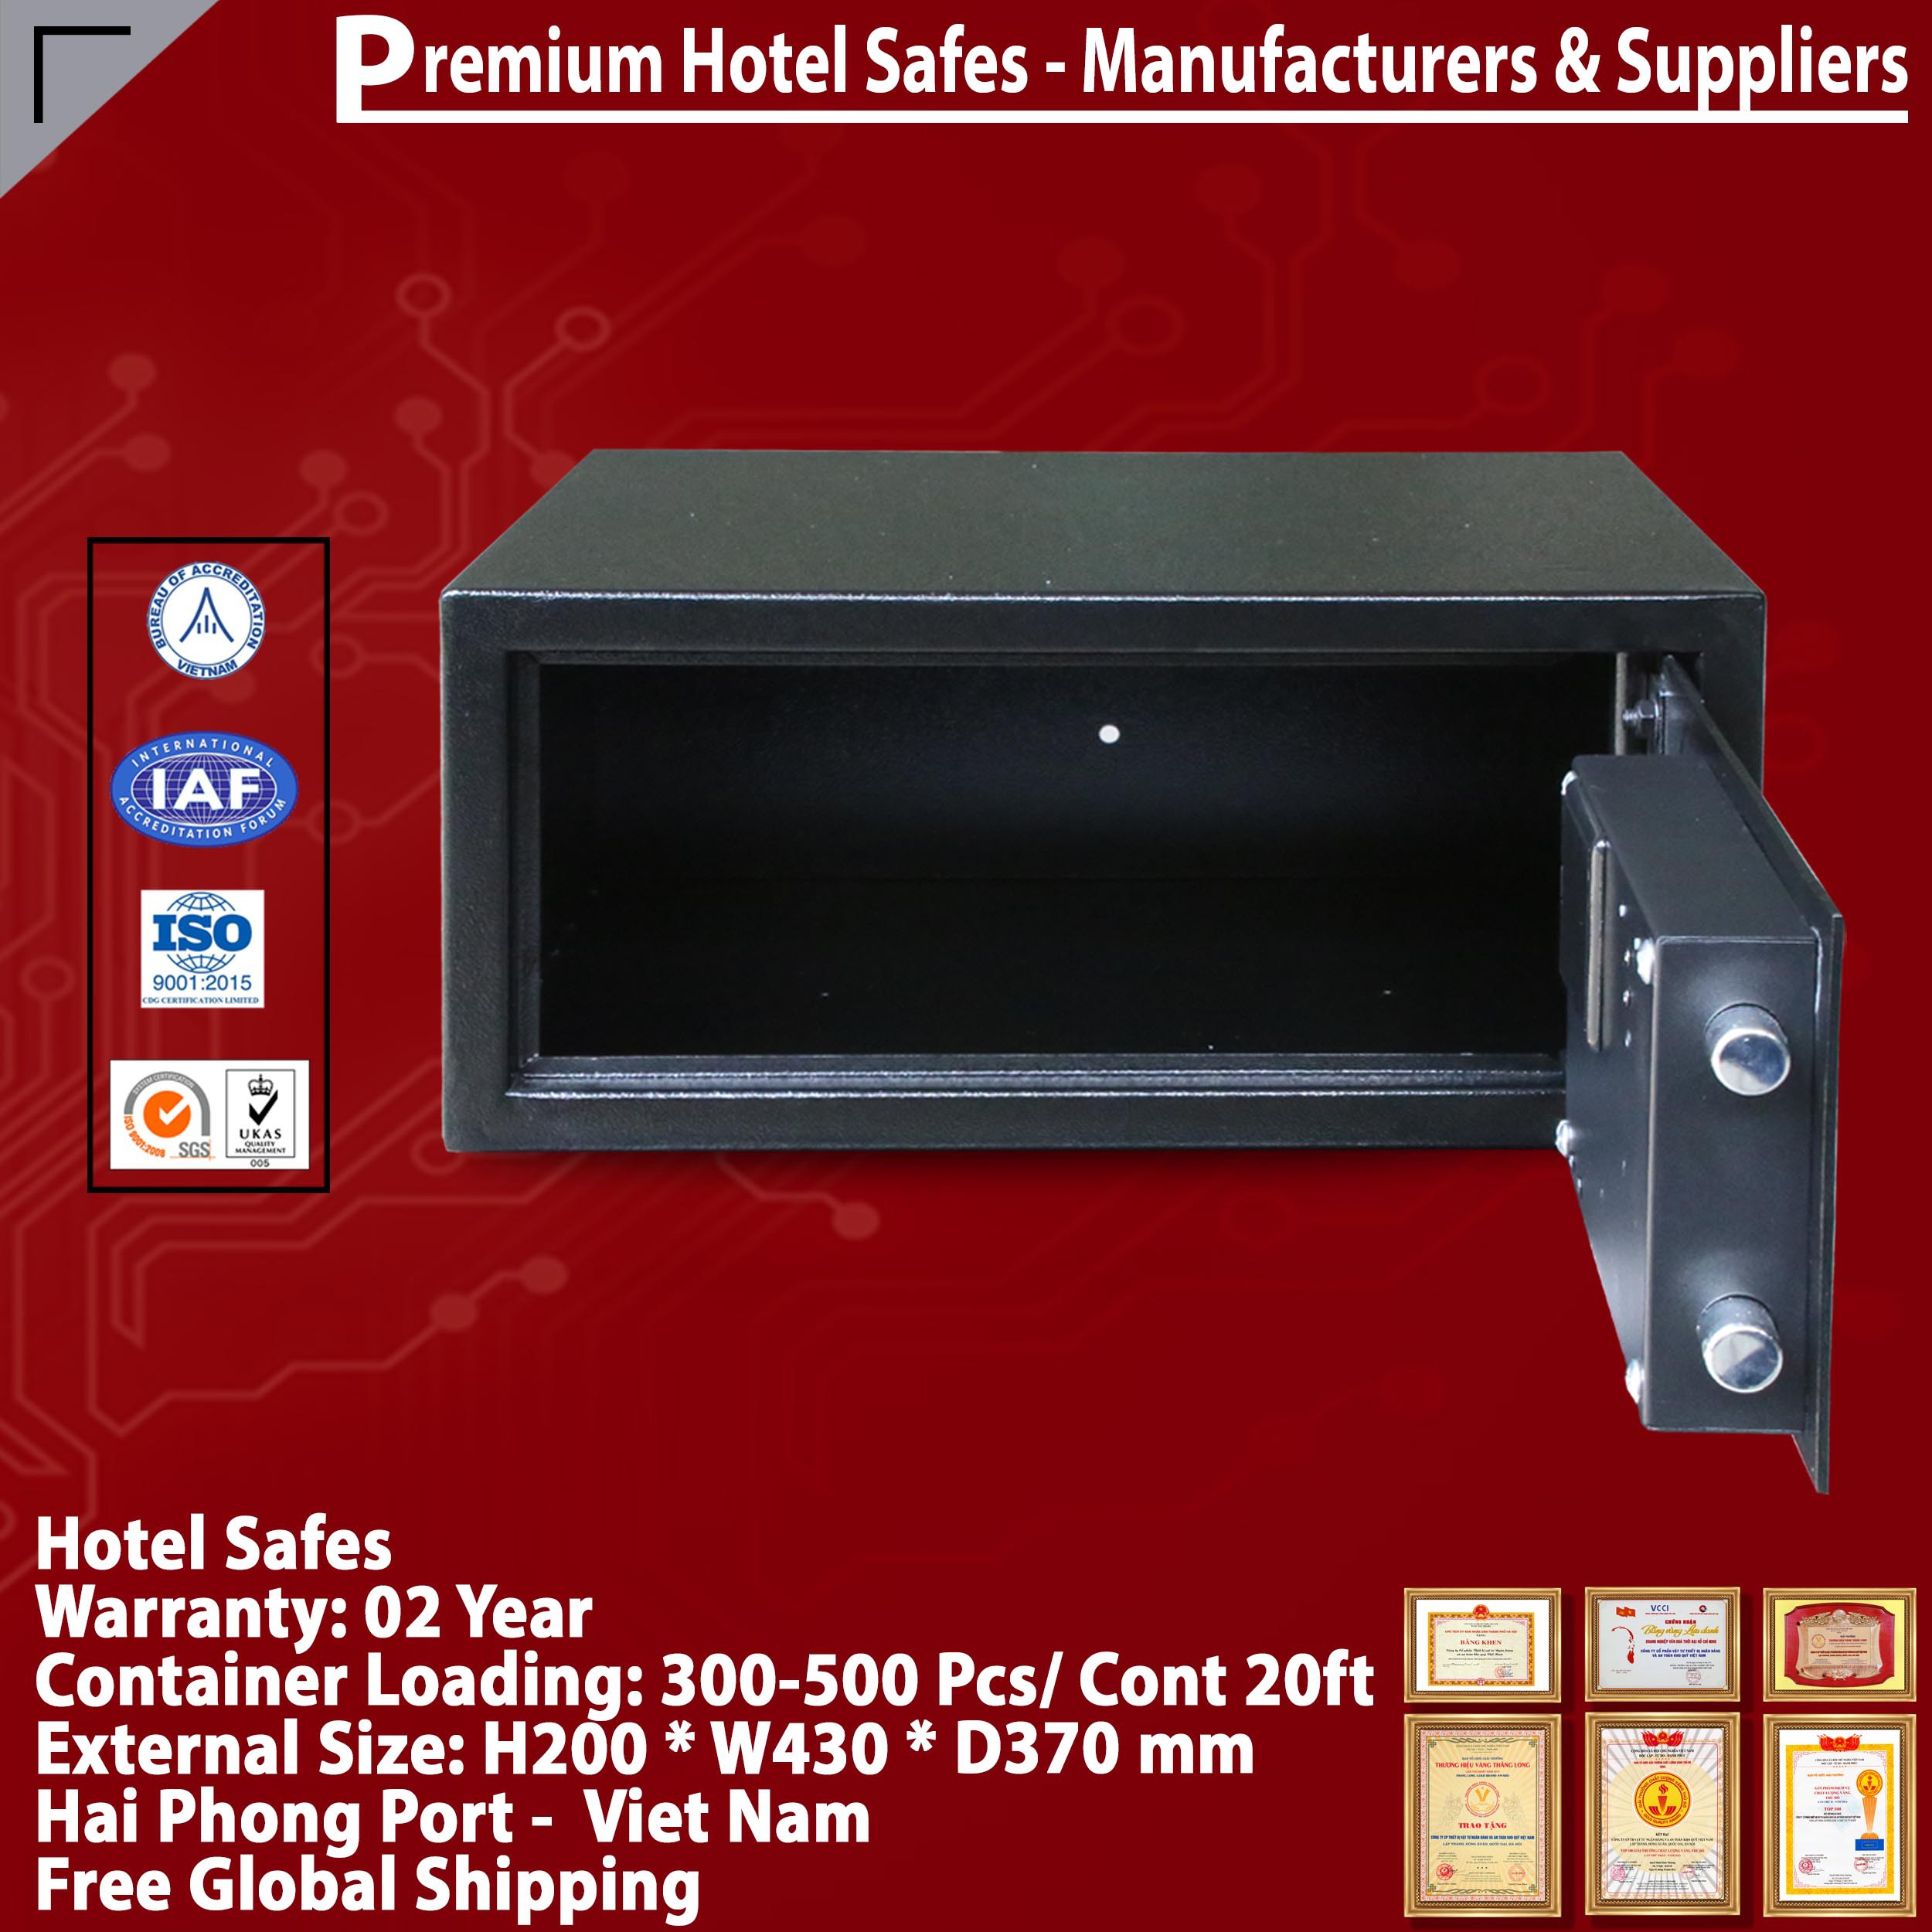 Hotel Safe Dimensions Made In Viet Nam